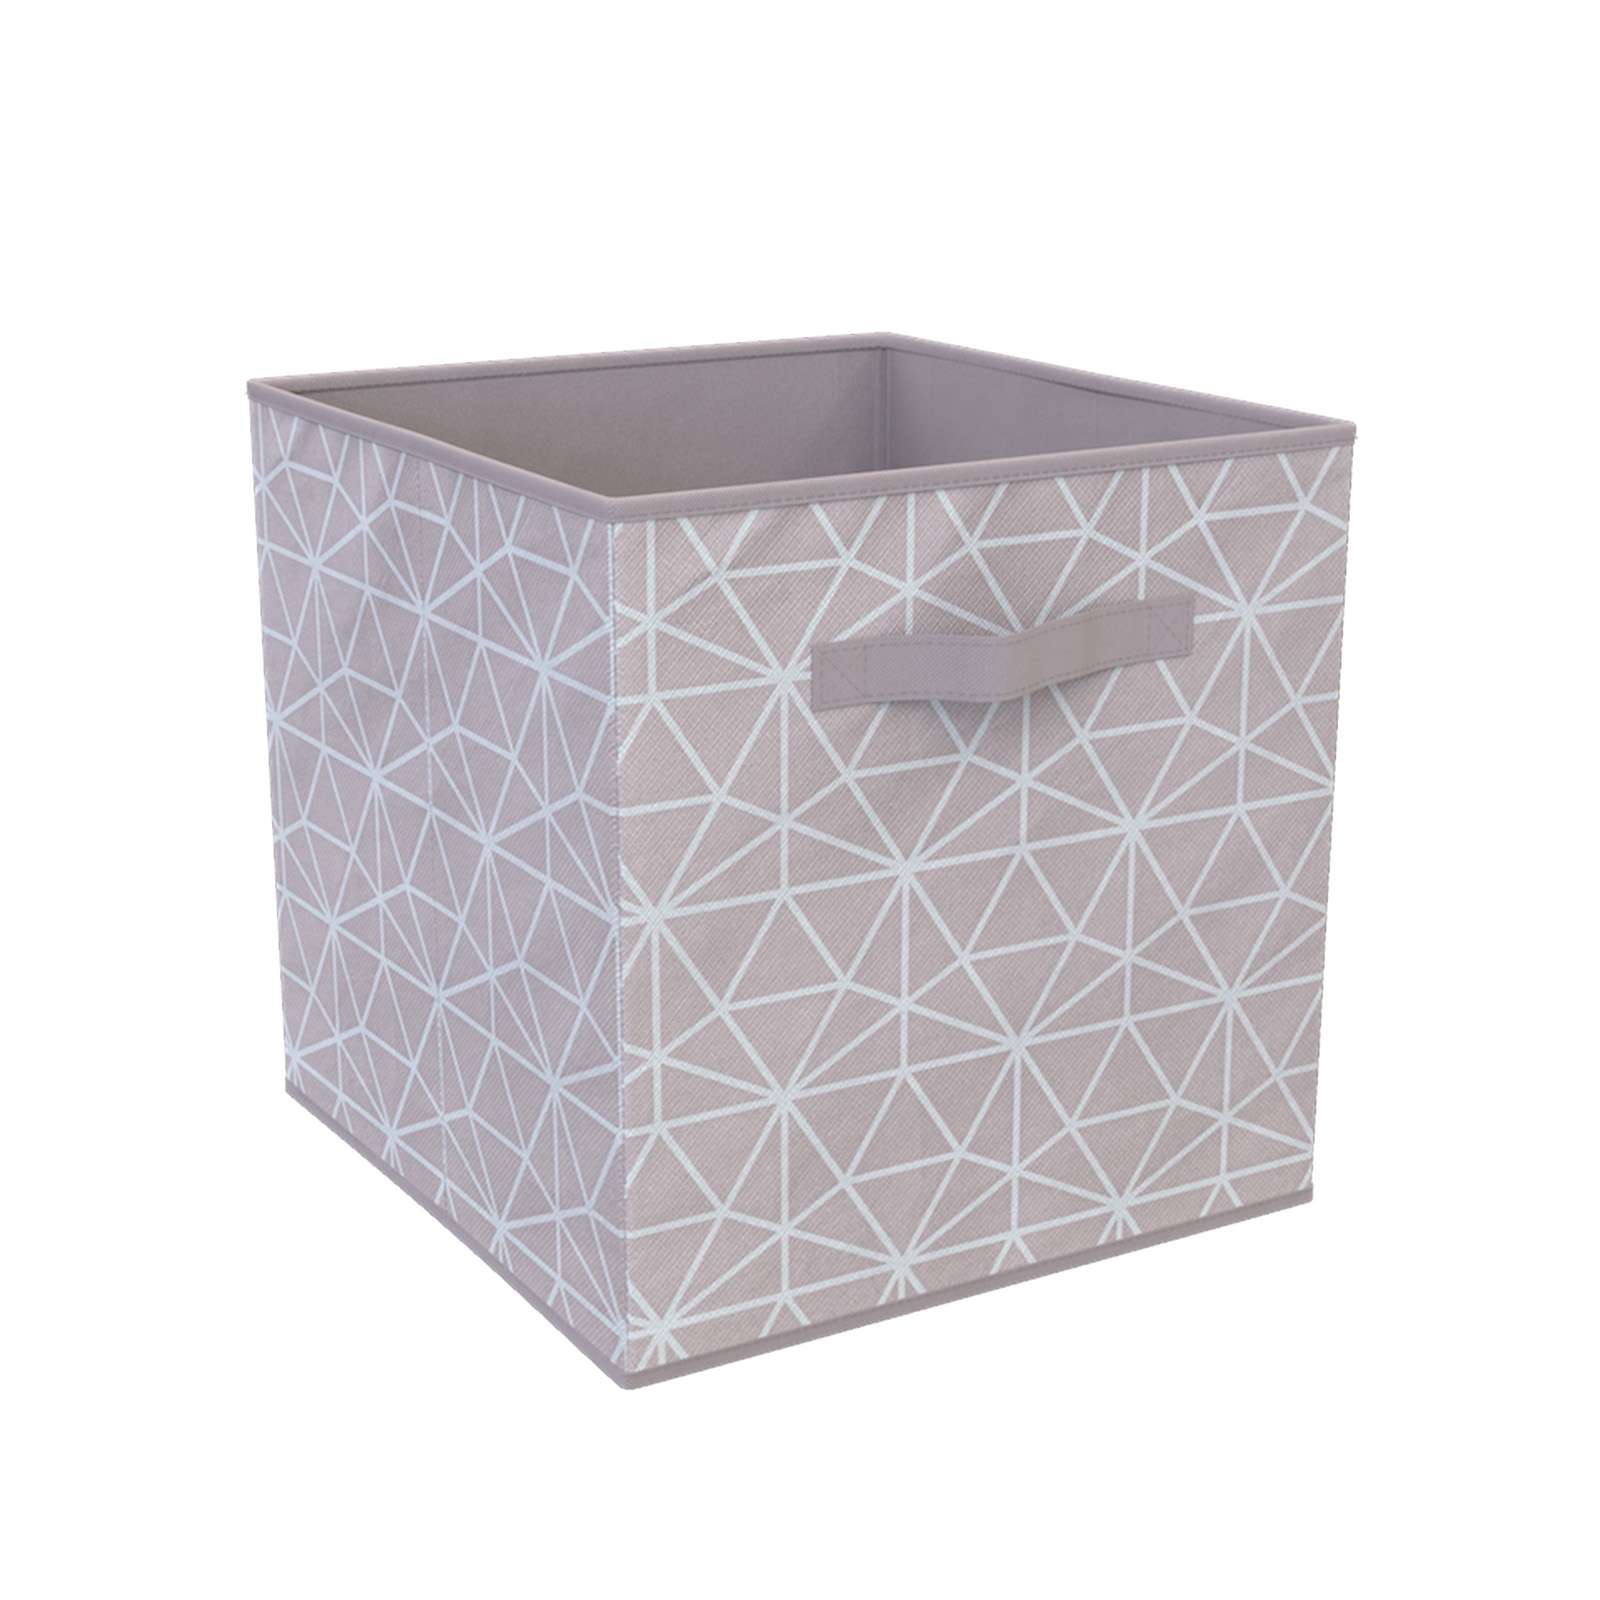 Clever Cube Compact Fabric Insert Lilac Geometric